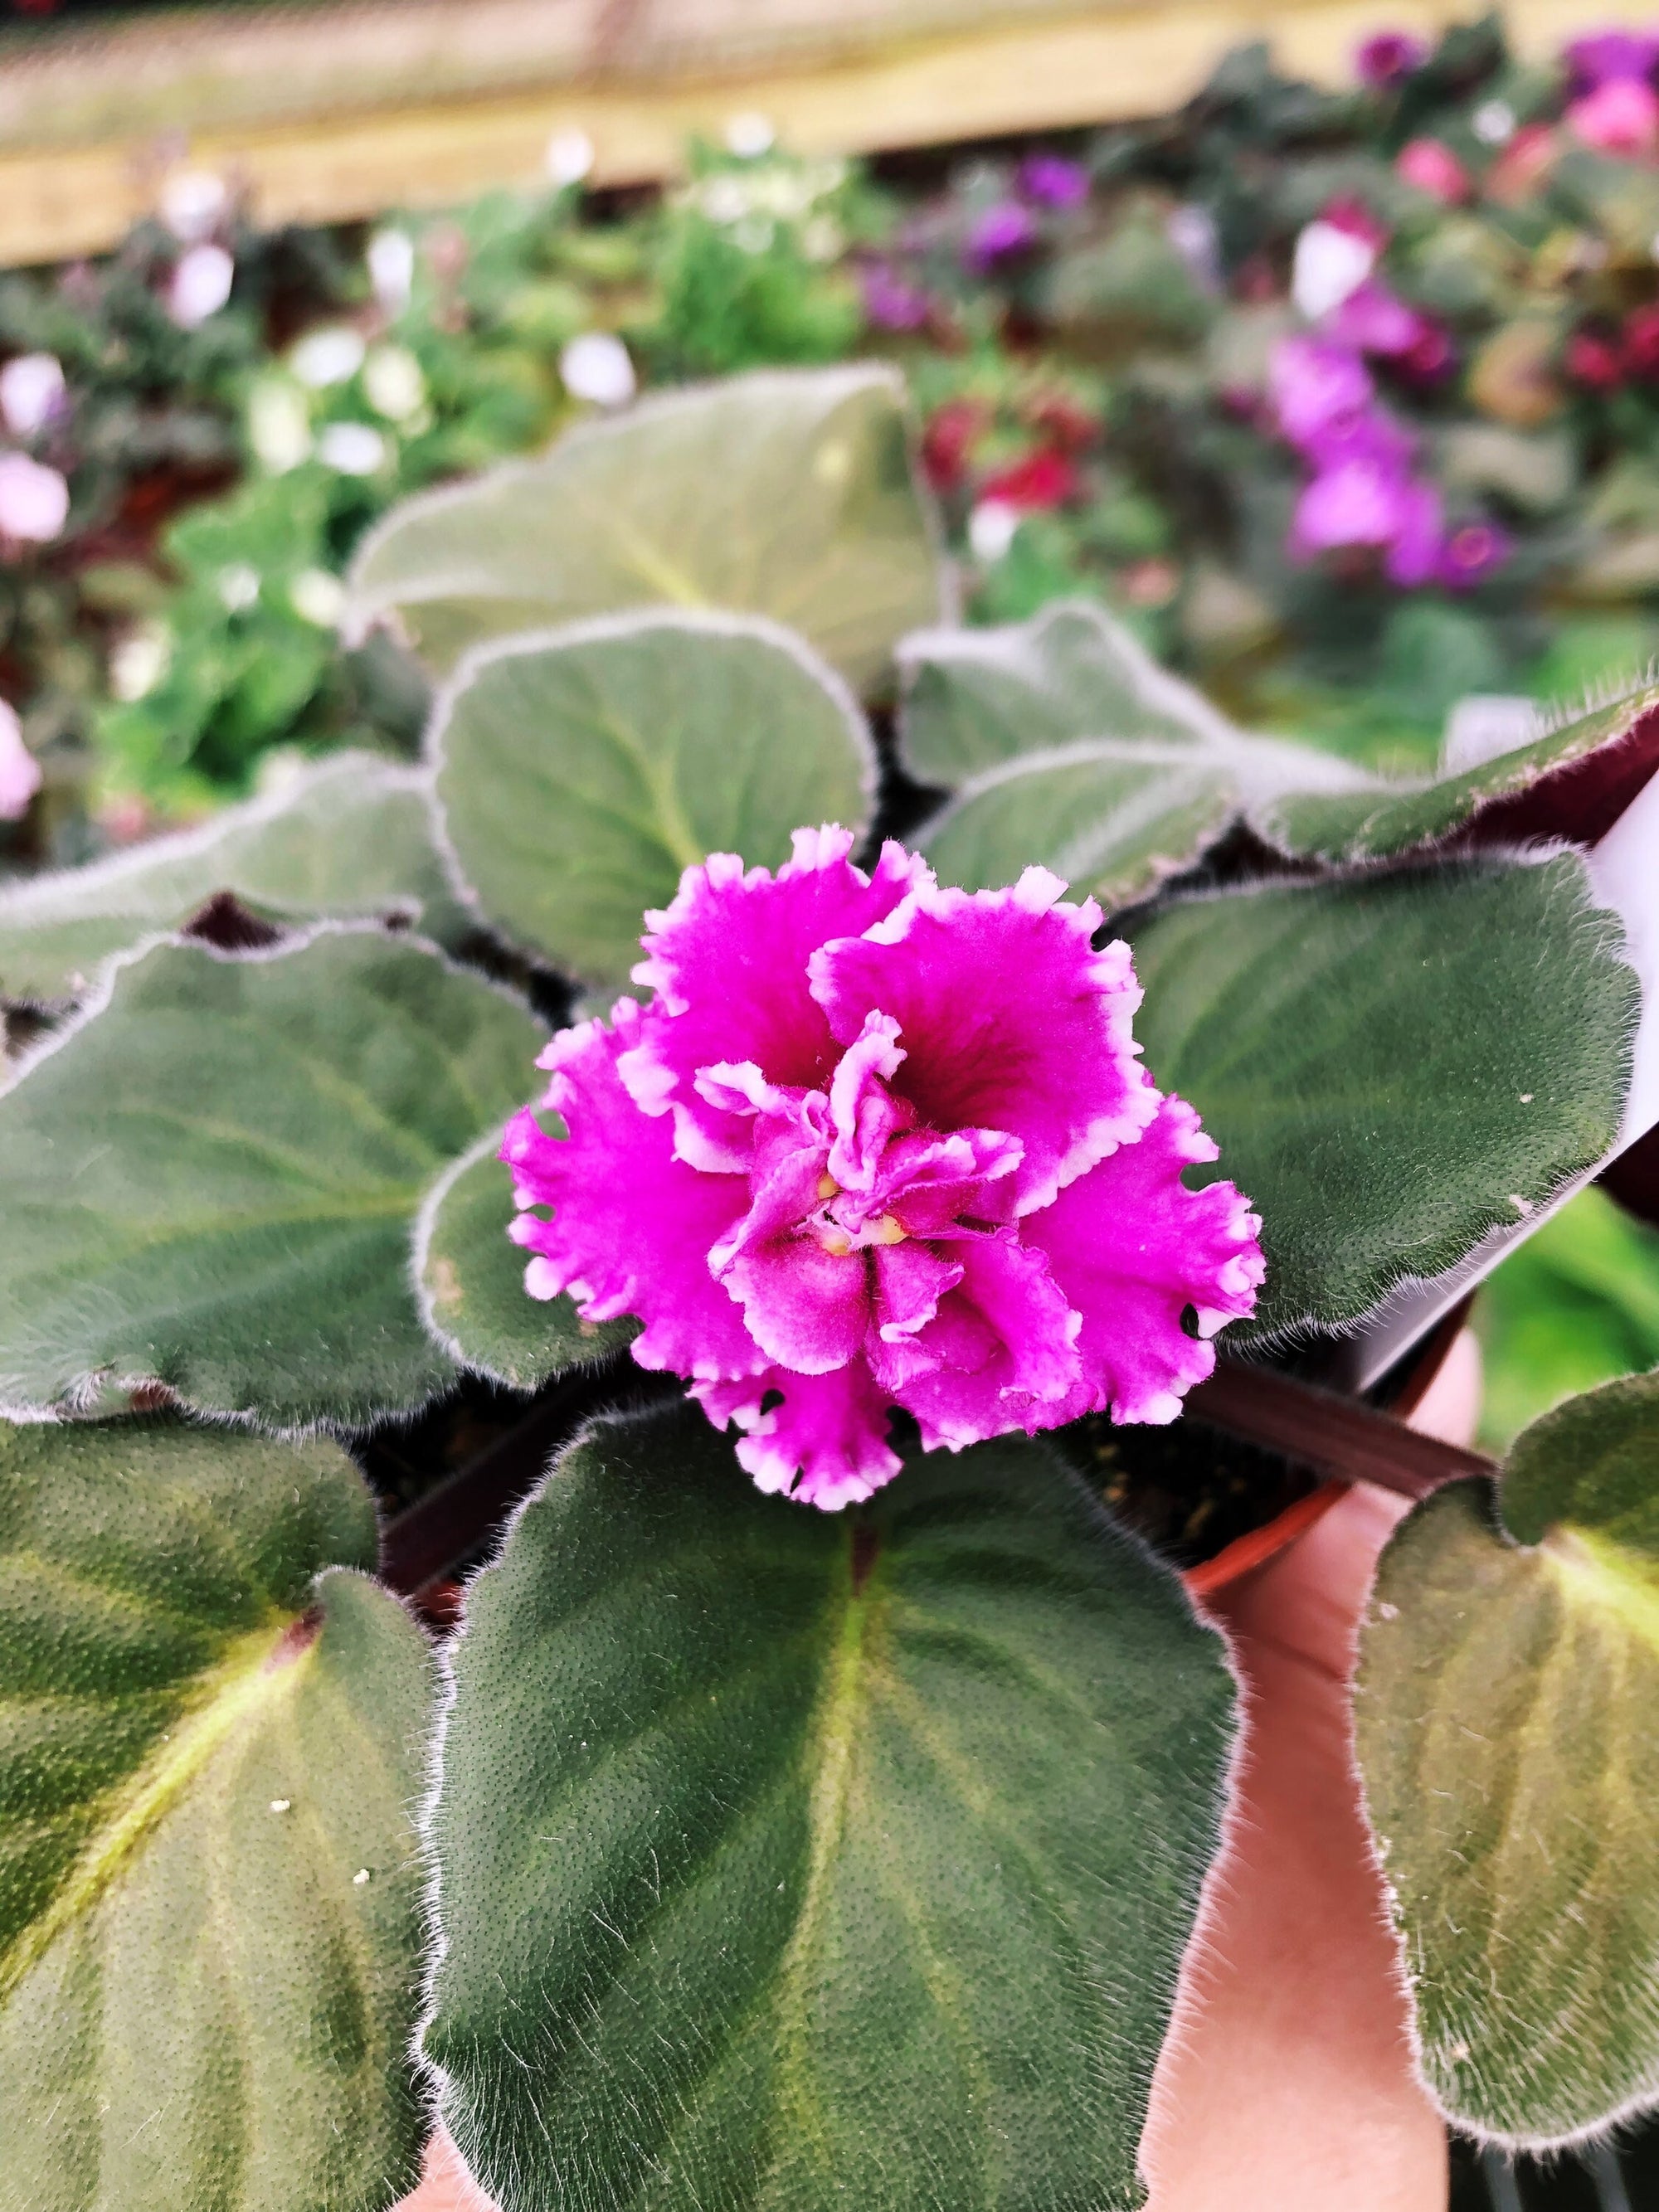 Live house plant bloom African Violet Harmony’s ‘Wrangler’s Boot Stompin’ garden 4” pot flower Potted gift